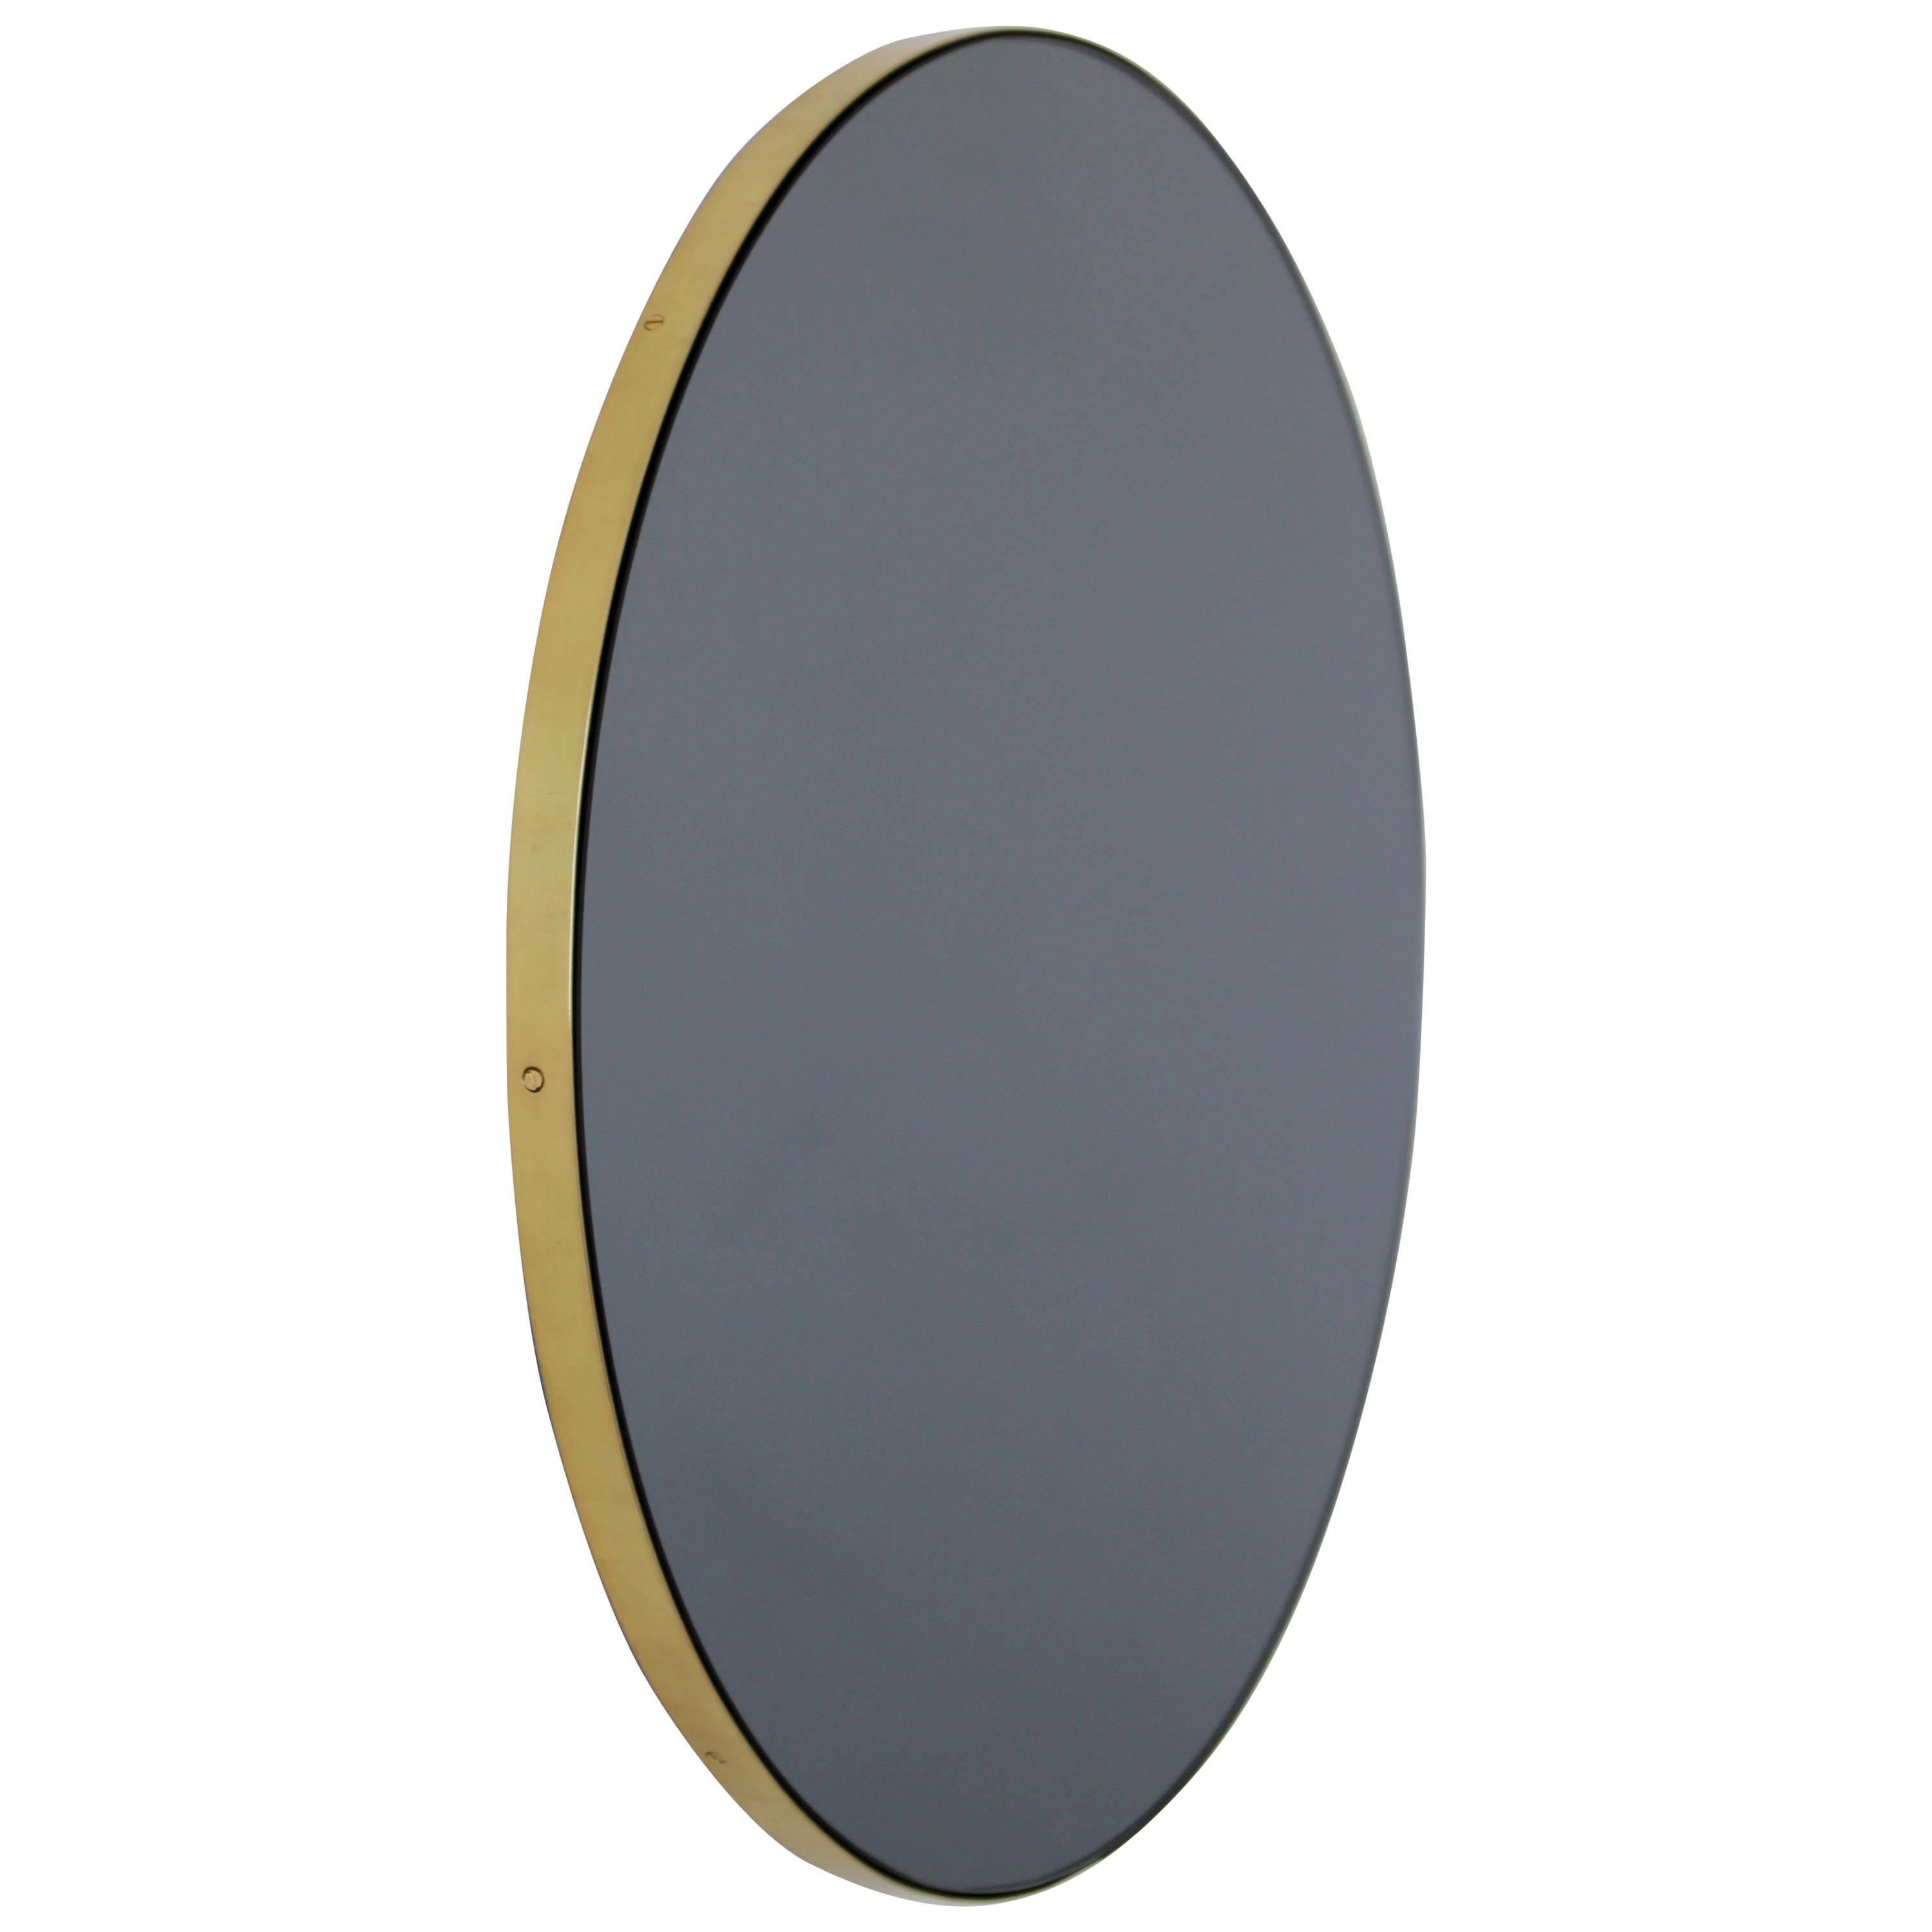 Orbis Black Tinted Round Contemporary Mirror with a Brass Frame, Medium For Sale